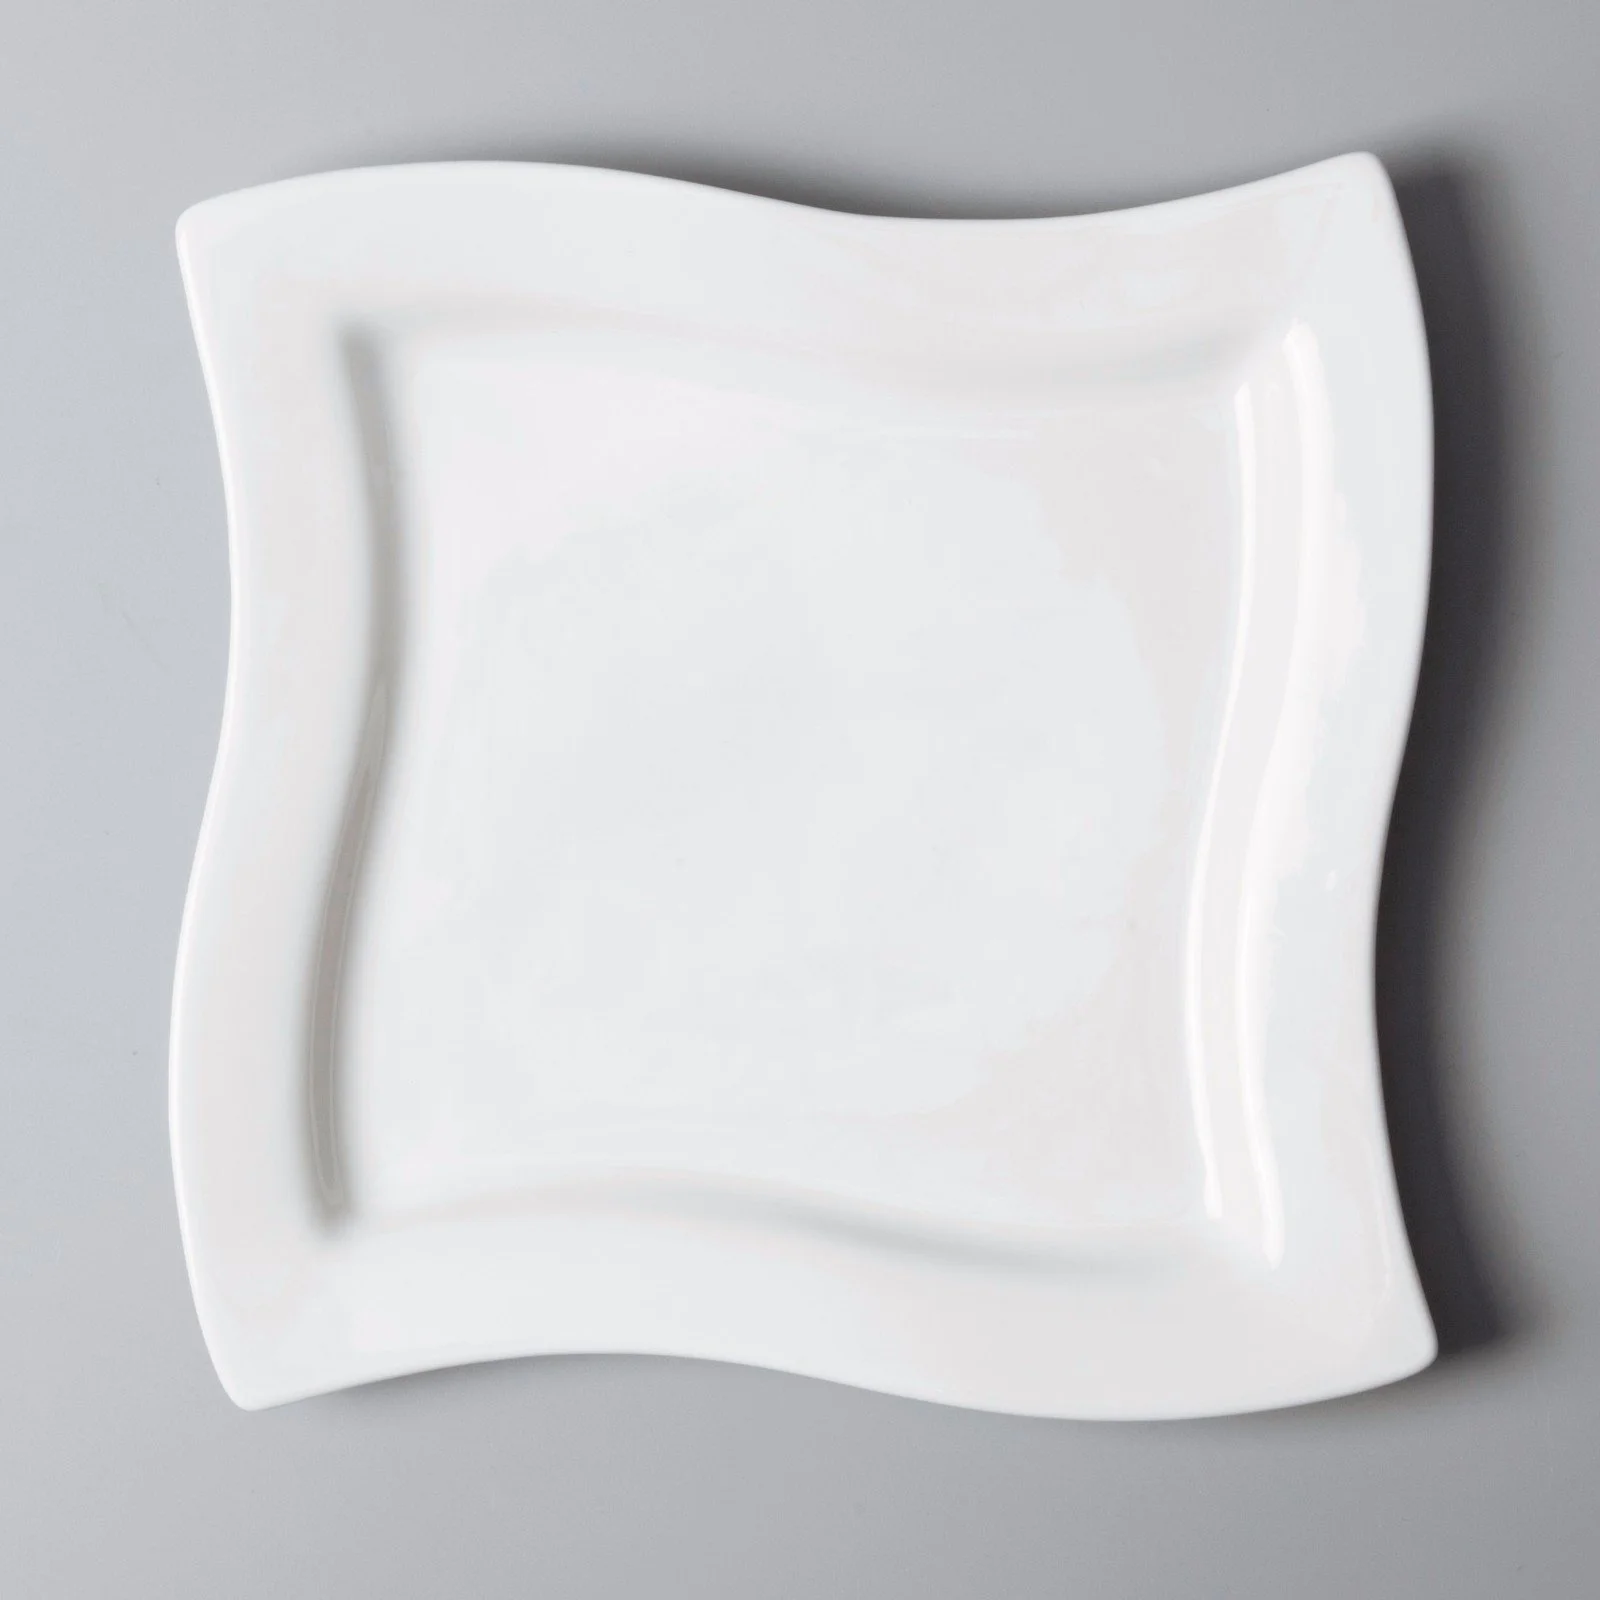 simply fine porcelain plates customized for hotel